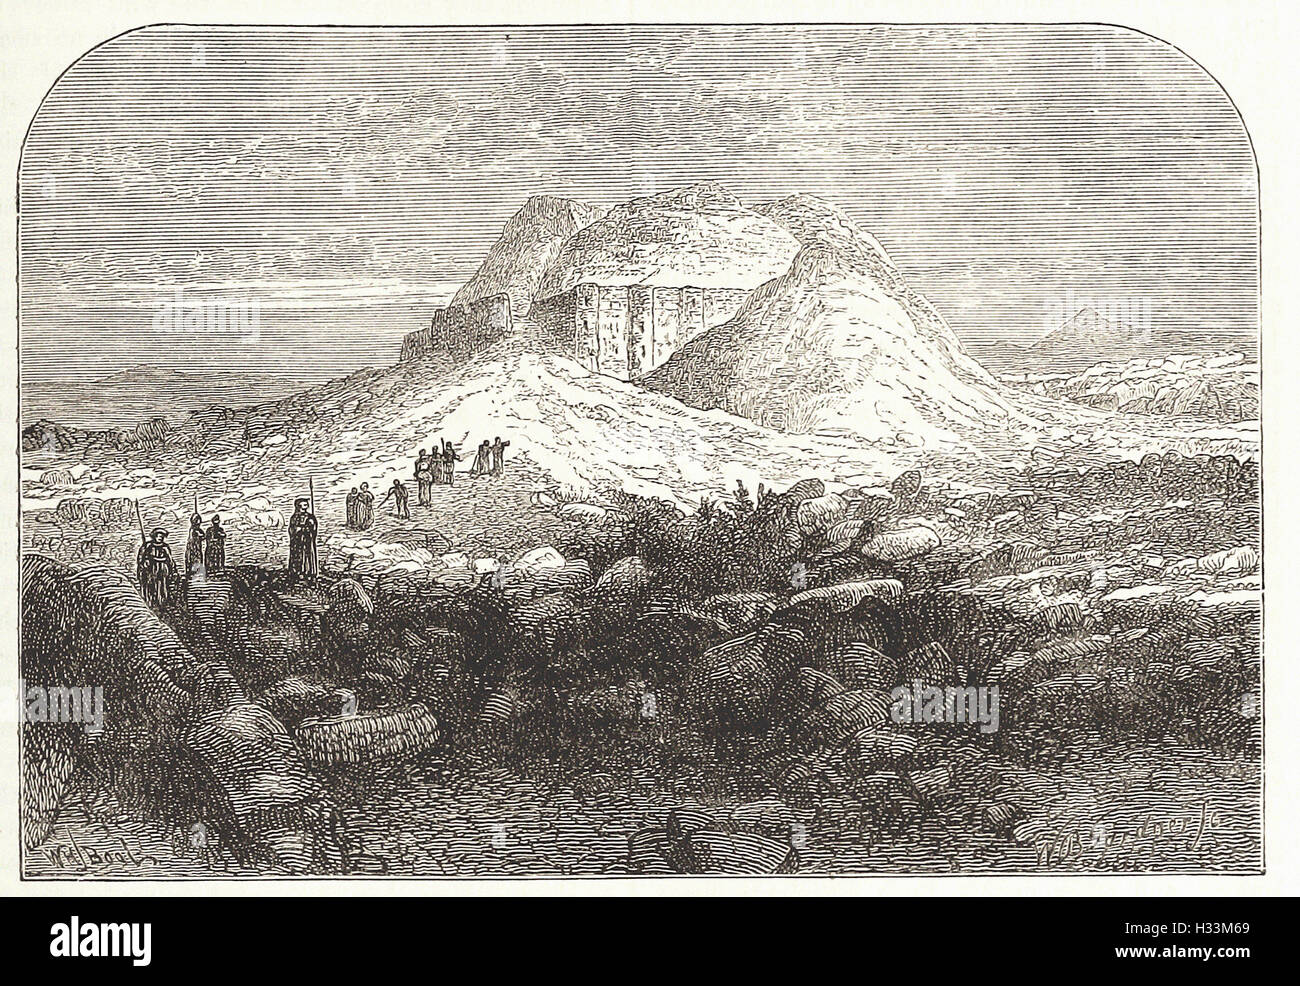 ANCIENT RUINS AT MUGHEIR  from 'Cassell's Illustrated Universal History' - 1882 Stock Photo